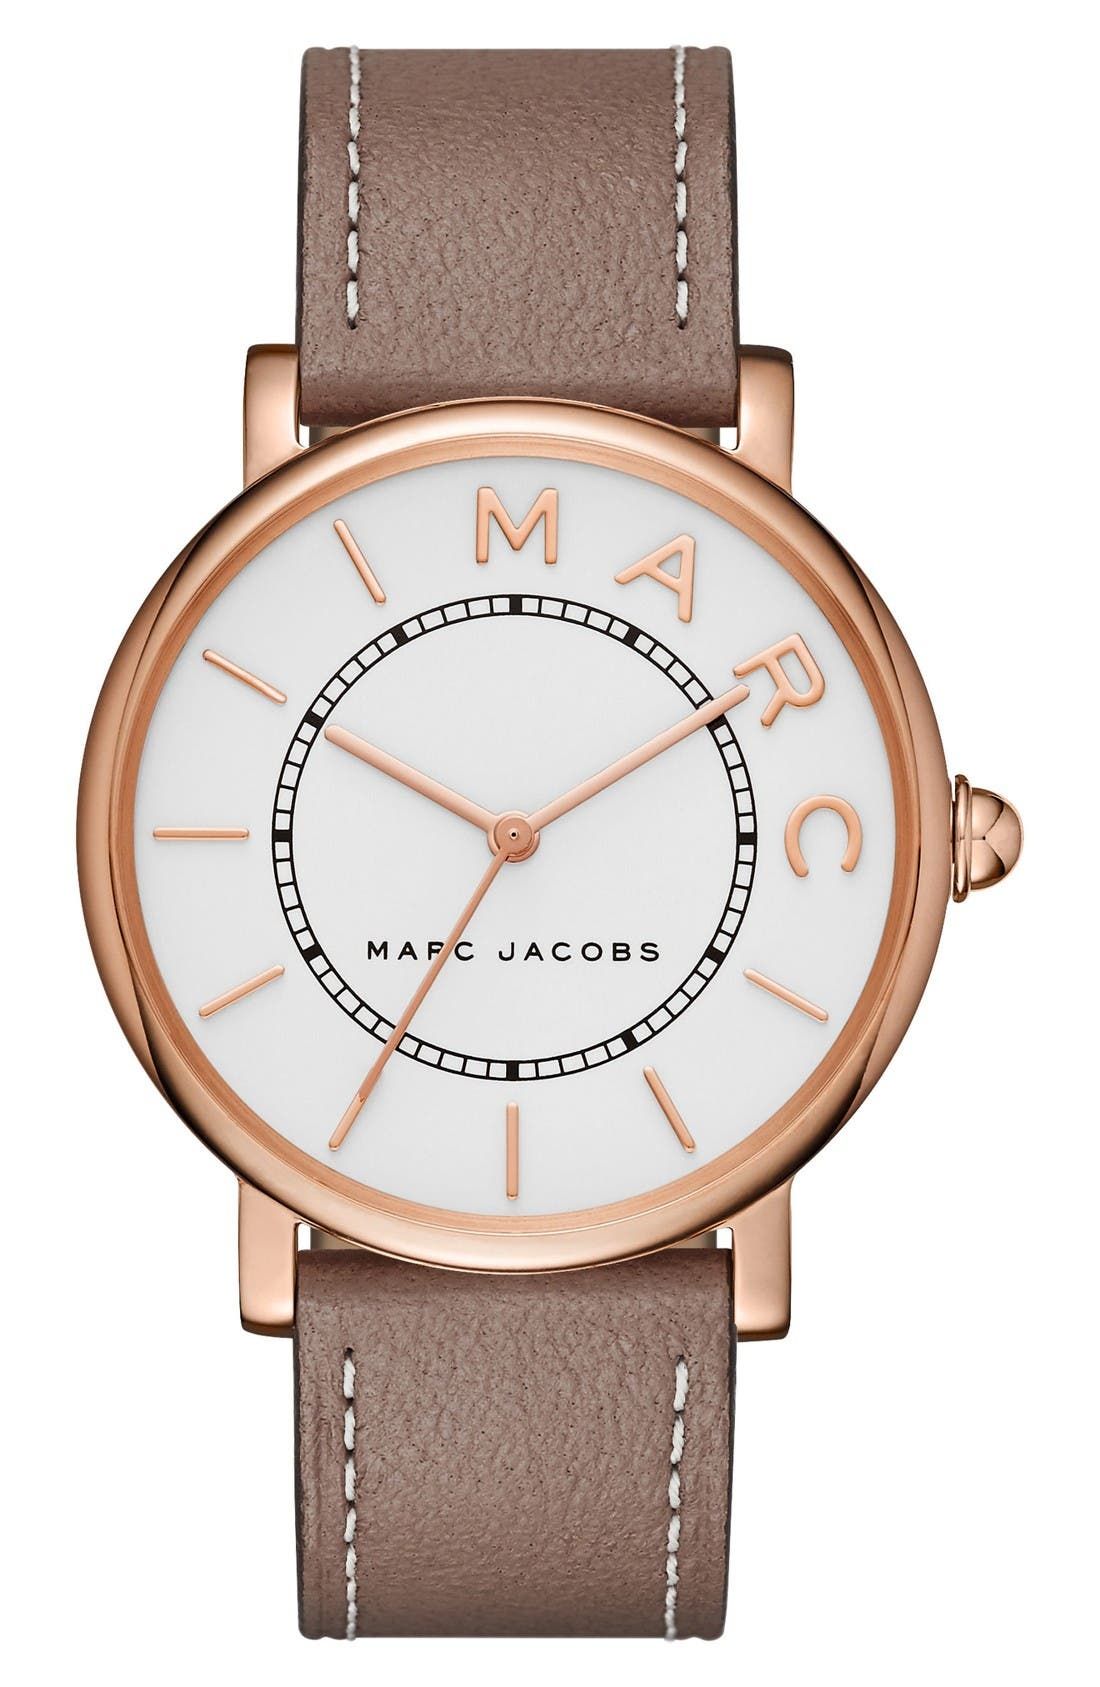 MARC JACOBS Roxy Leather Strap Watch, 36mm | Nordstrom